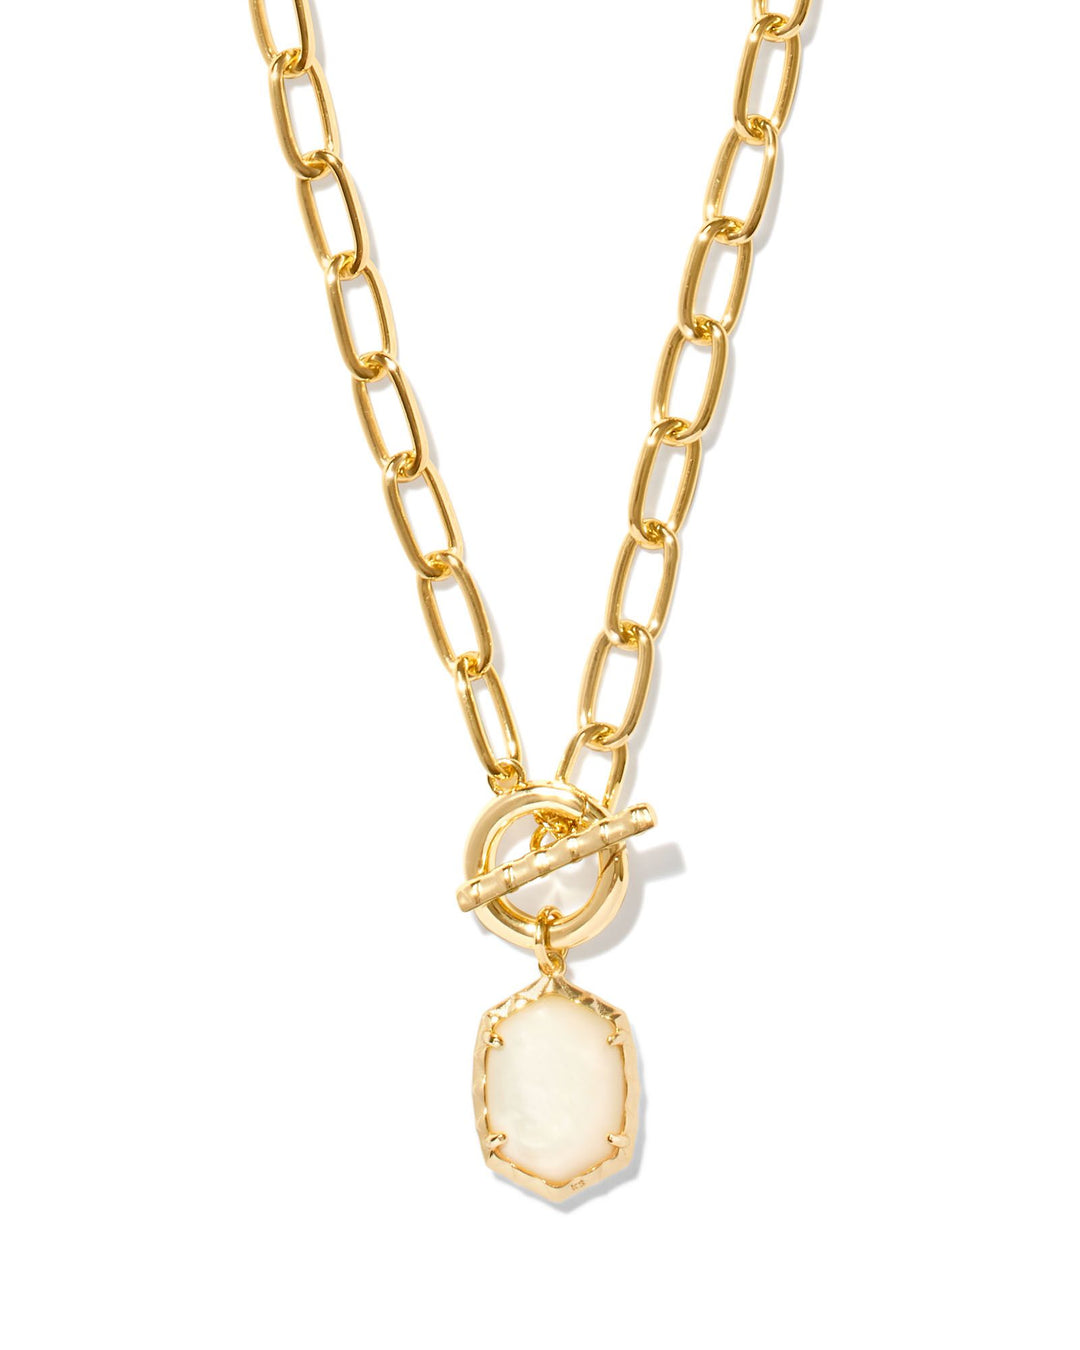 DAPHNE LINK & CHAIN NECKLACE, GOLD IVORY MOTHER OF PEARL